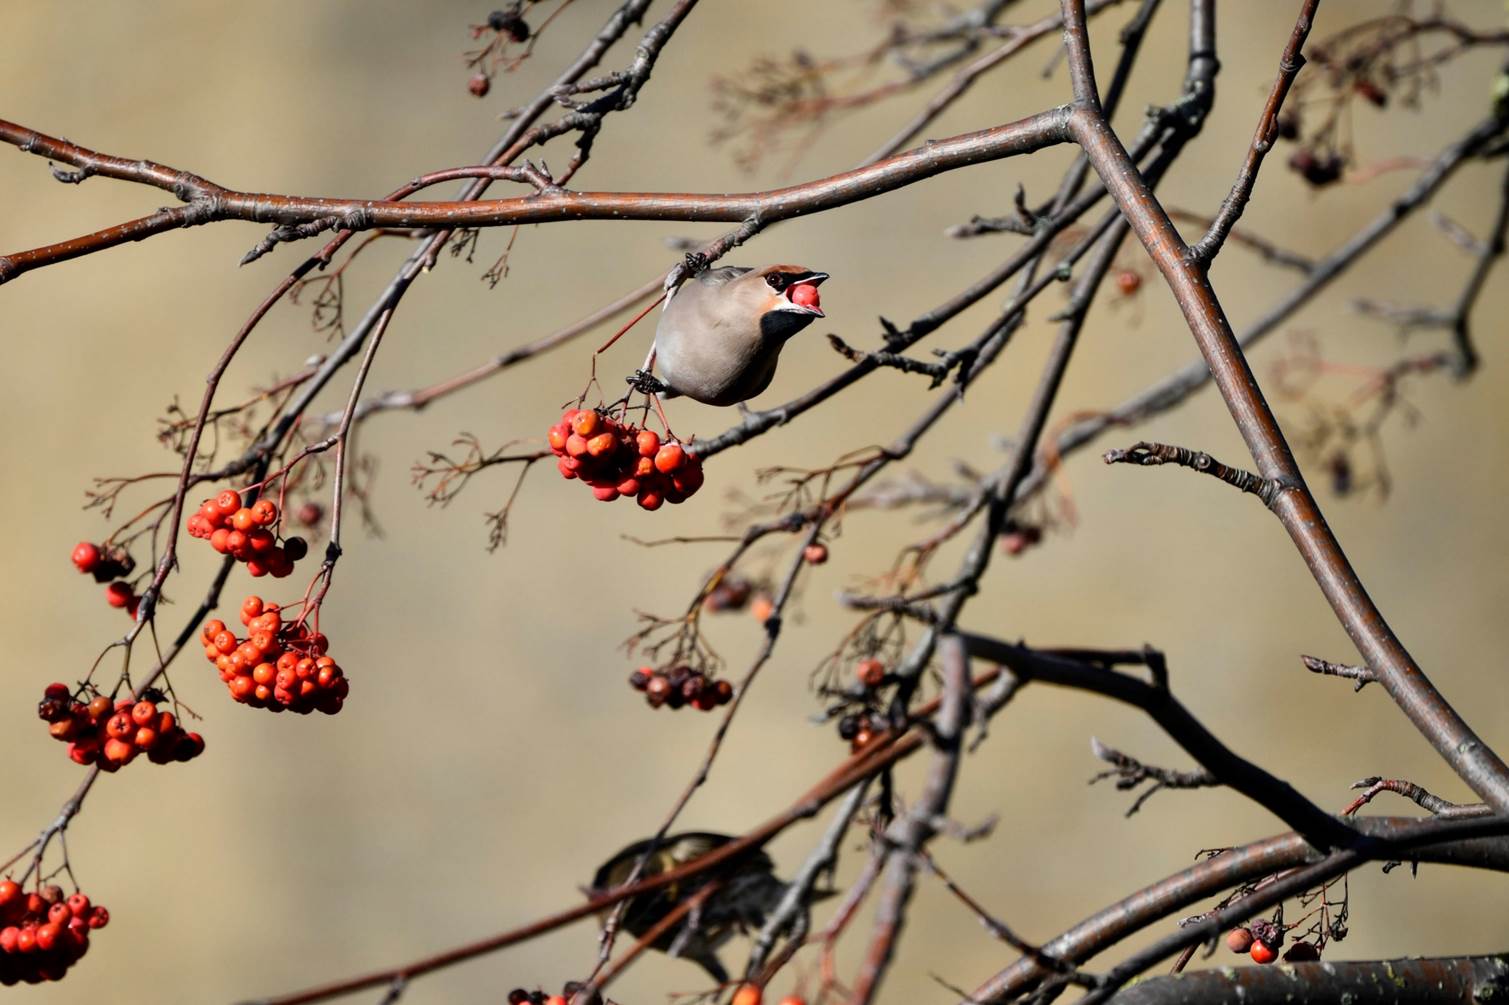 A bird eating berries on a tree

Description automatically generated